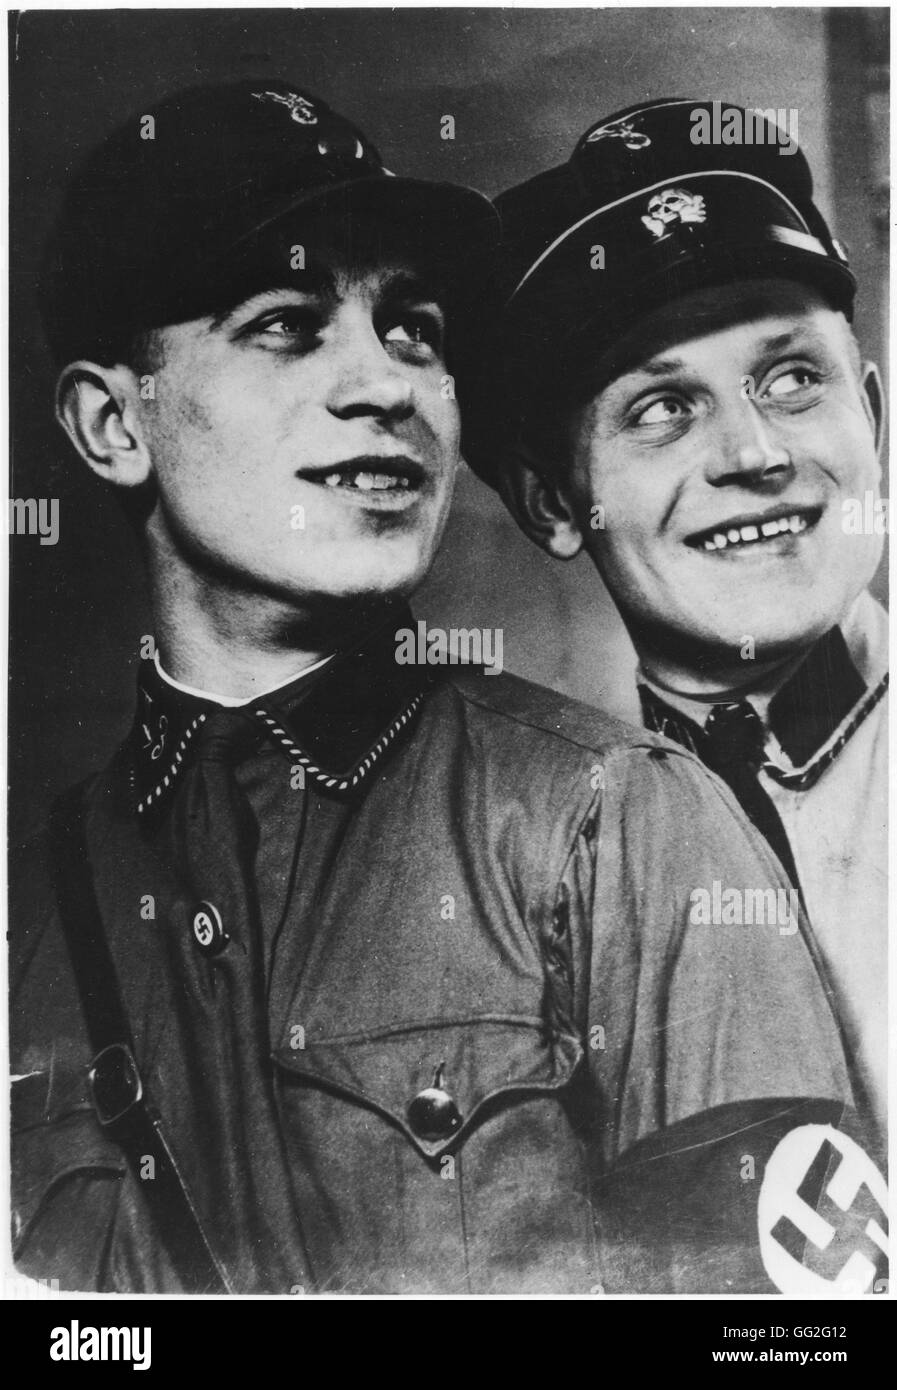 Two young SA members, one of them wearing the skull on his cap.  Germany 1933. Stock Photo